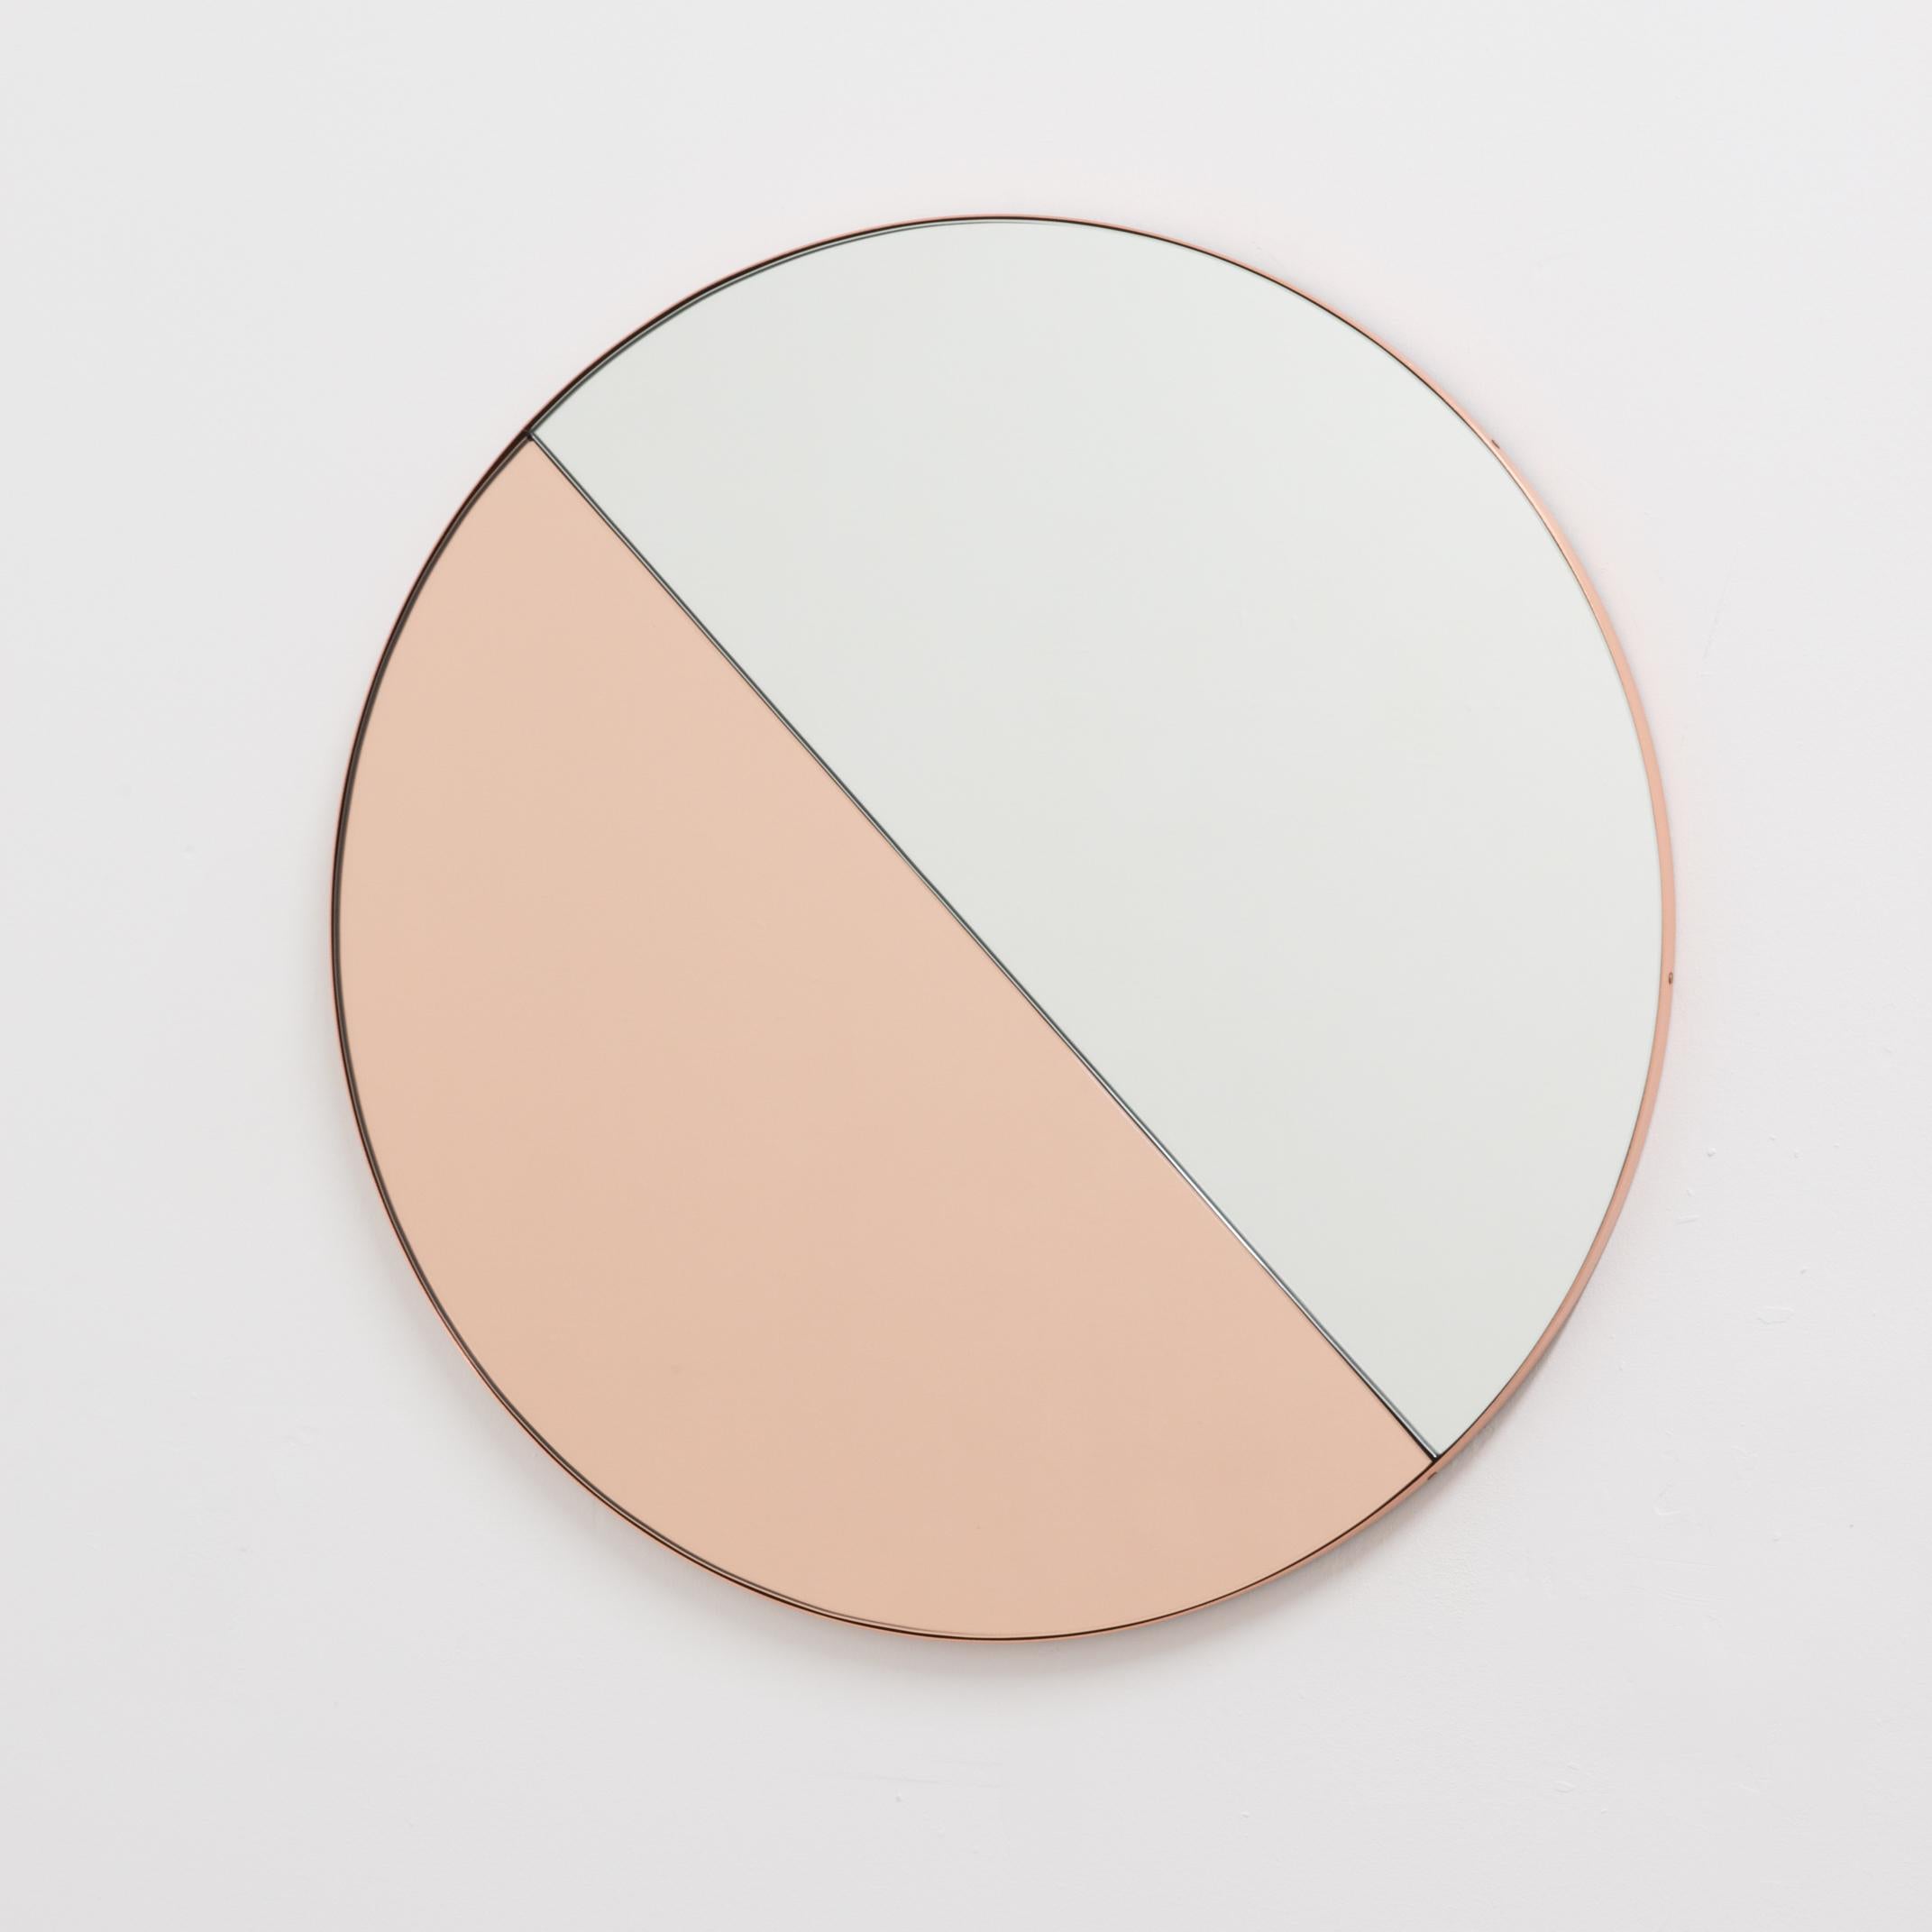 Orbis Dualis Mixed 'Rose Gold + Silver' Round Mirror with Copper Frame, Oversized 7